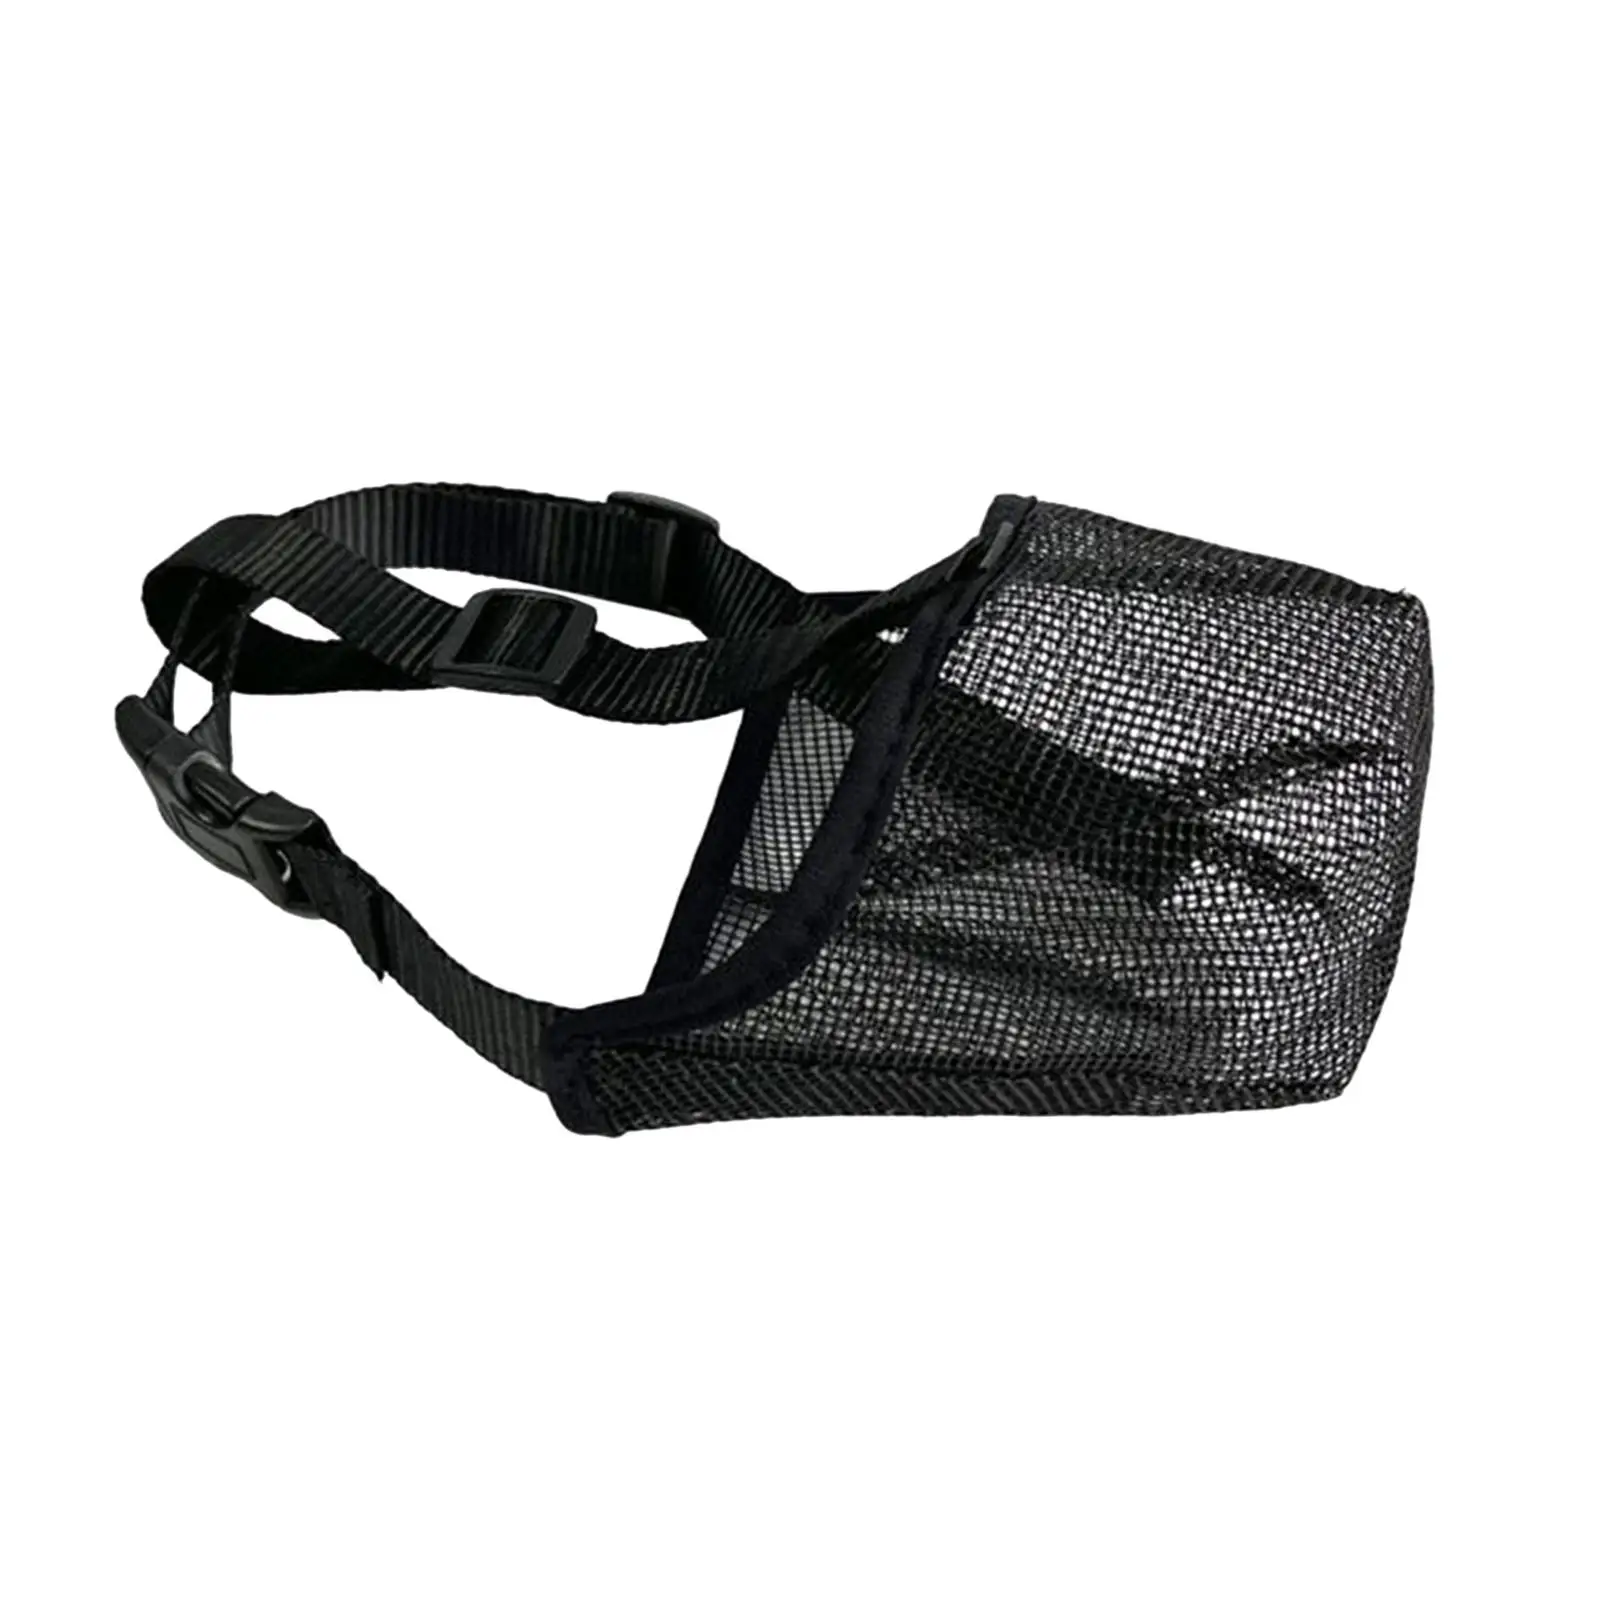 Muzzle for Dog with Adjustable Straps Mesh Mask Cover for Behavior Training